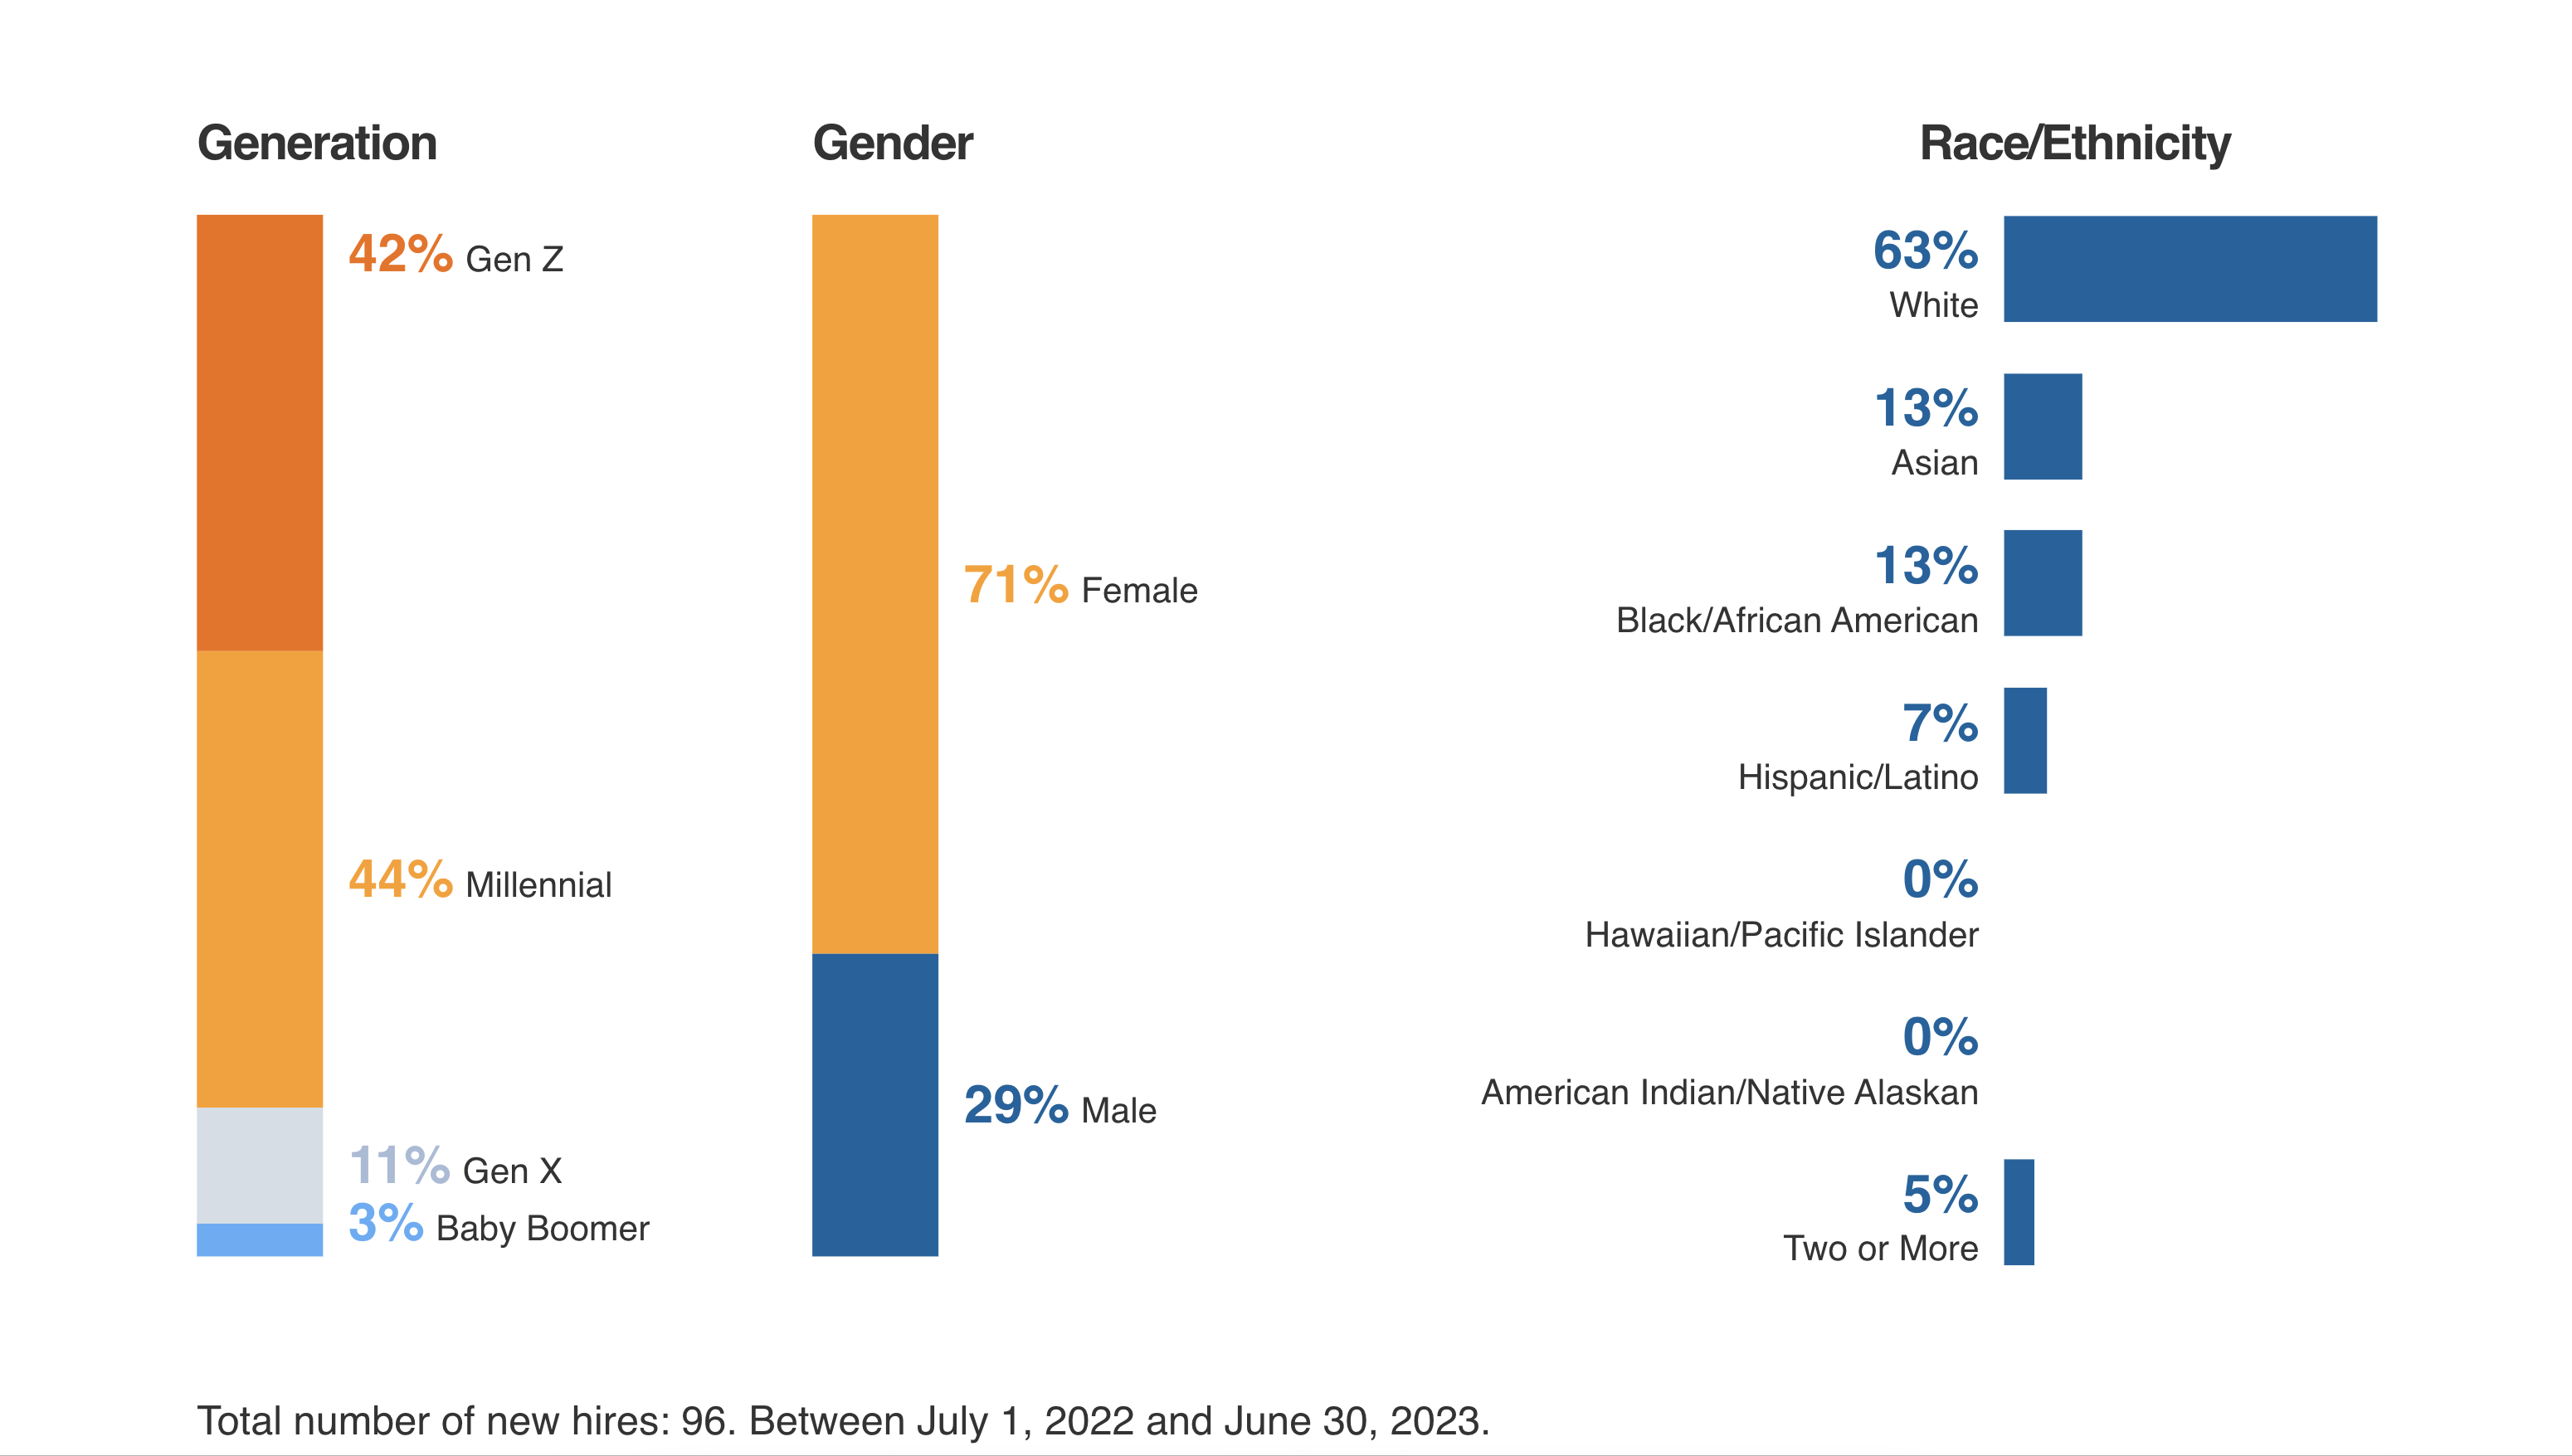 New hires data for 2023. 42% Gen Z, 44% Millenial, 11% Gen X, 3% Baby Boomer. 71% female, 29% male. 63% White, 13% Asian, 13% Black/African American, 7% Hispanic/Latino, 0% Hawaiian/Pacific Islander, 0% American Indian/Native Alaskan, 5% two or more. Total number of hires: 96. Between July 1, 2022 and June 30, 2023.